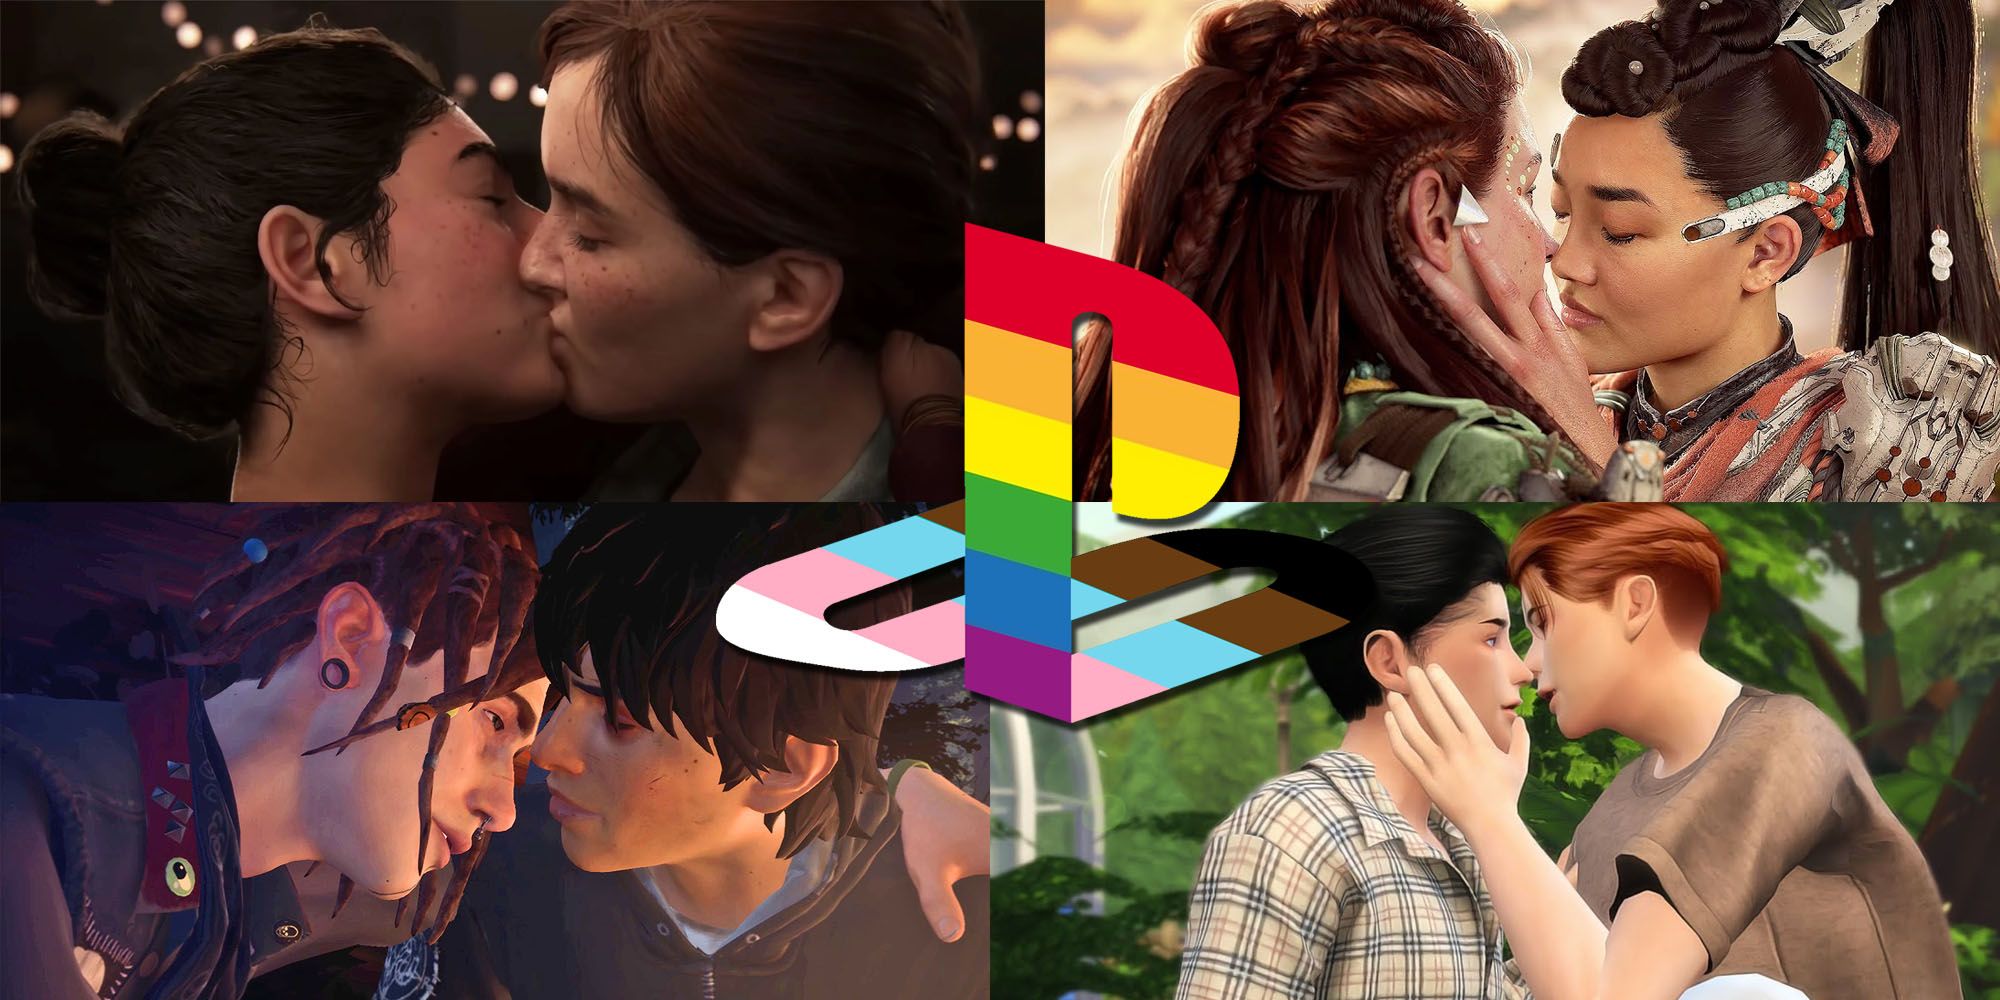 A collage of four kissing scenes, The Last of Us Part 1 and Horizon Forbidden West showing Lesbian relationships, Life is Strange 2 showing a gay relationship and The Sims 4 showing non-binary ove, They are all behind a modified version of the playstation logo with pride colors.